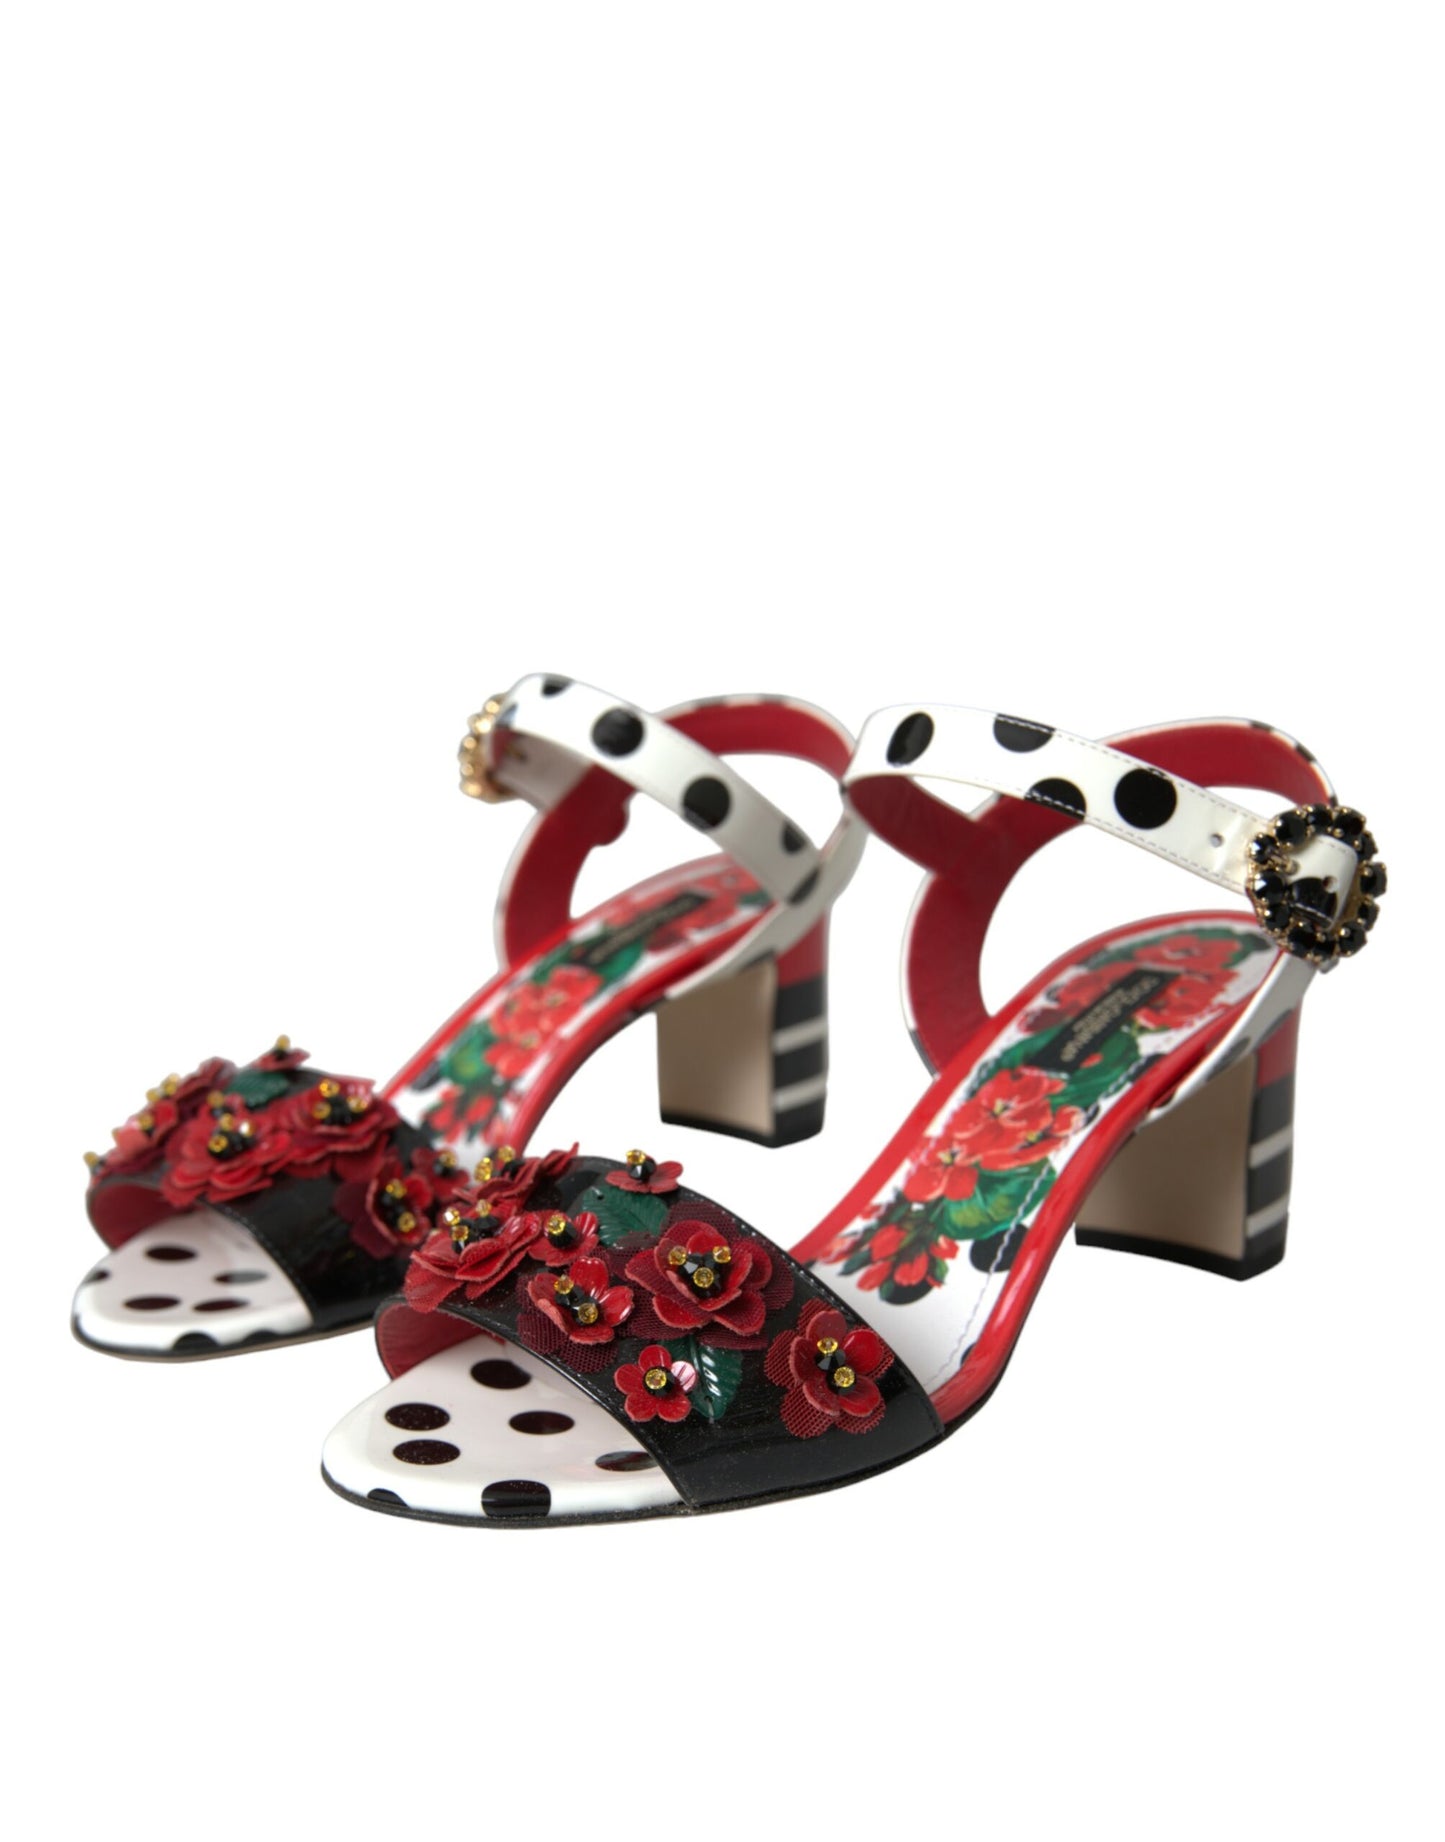 Multicolor Floral Crystal Leather Sandals Shoes